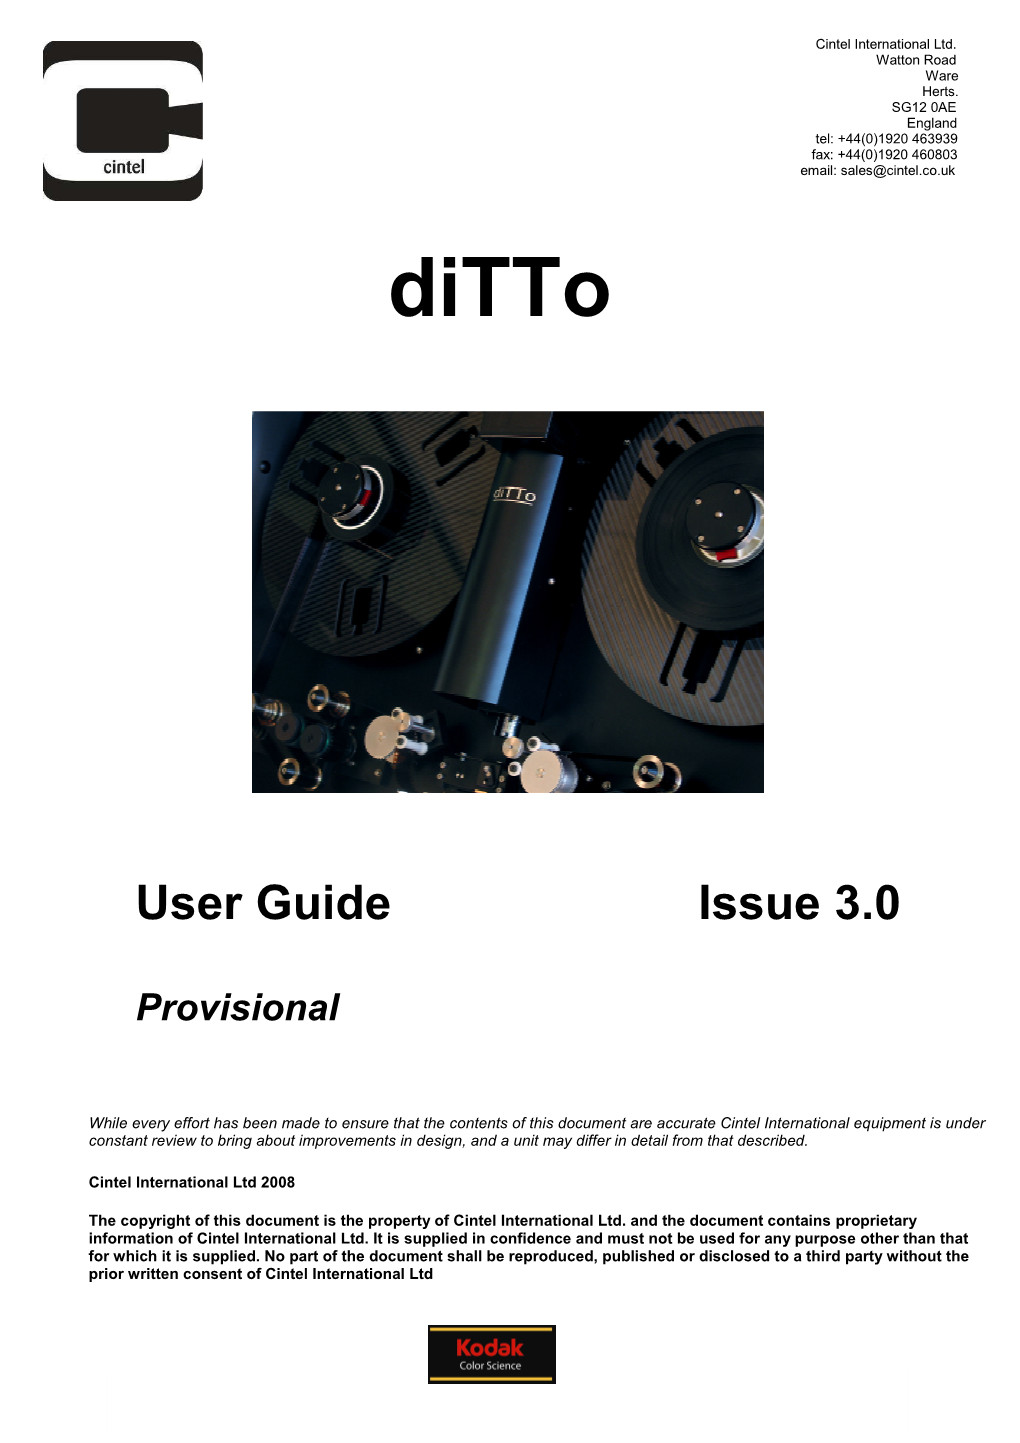 Ditto User Guide V3.0 Provisional